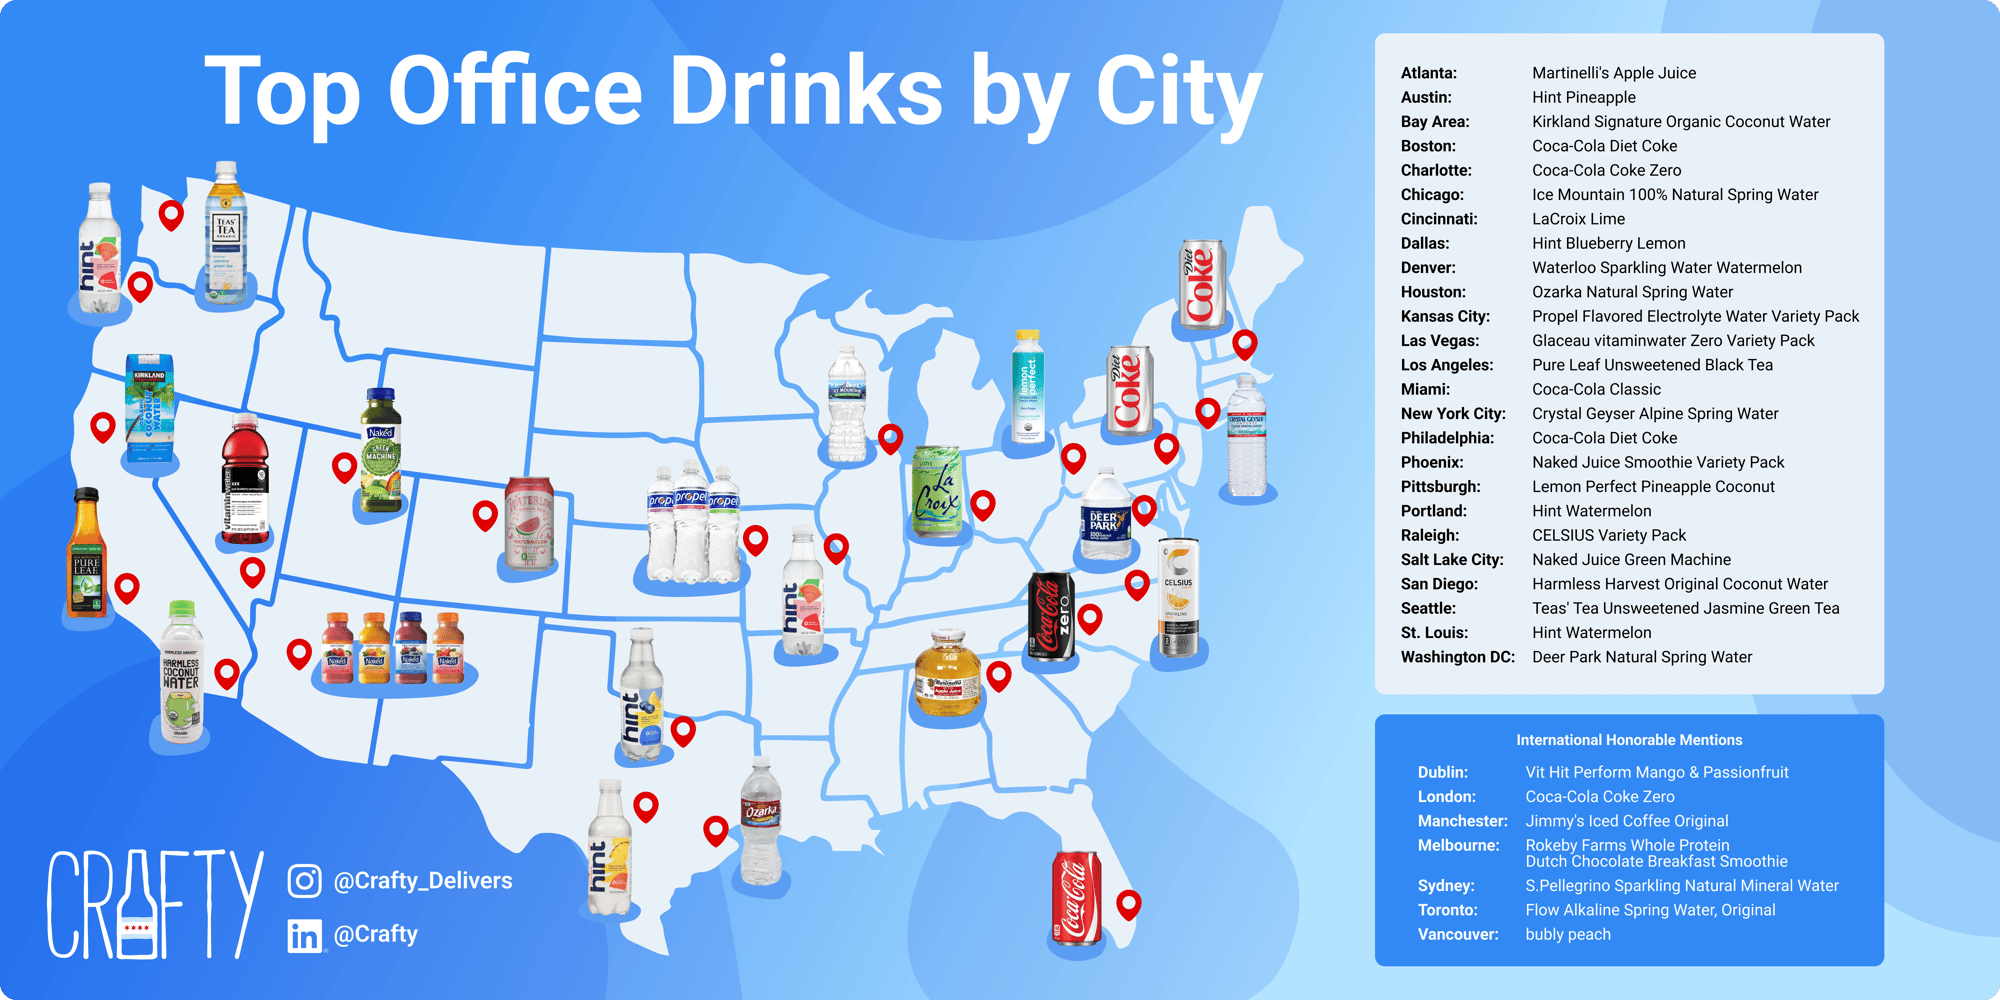 Craftys 2023 Top Office Drinks By City (2)